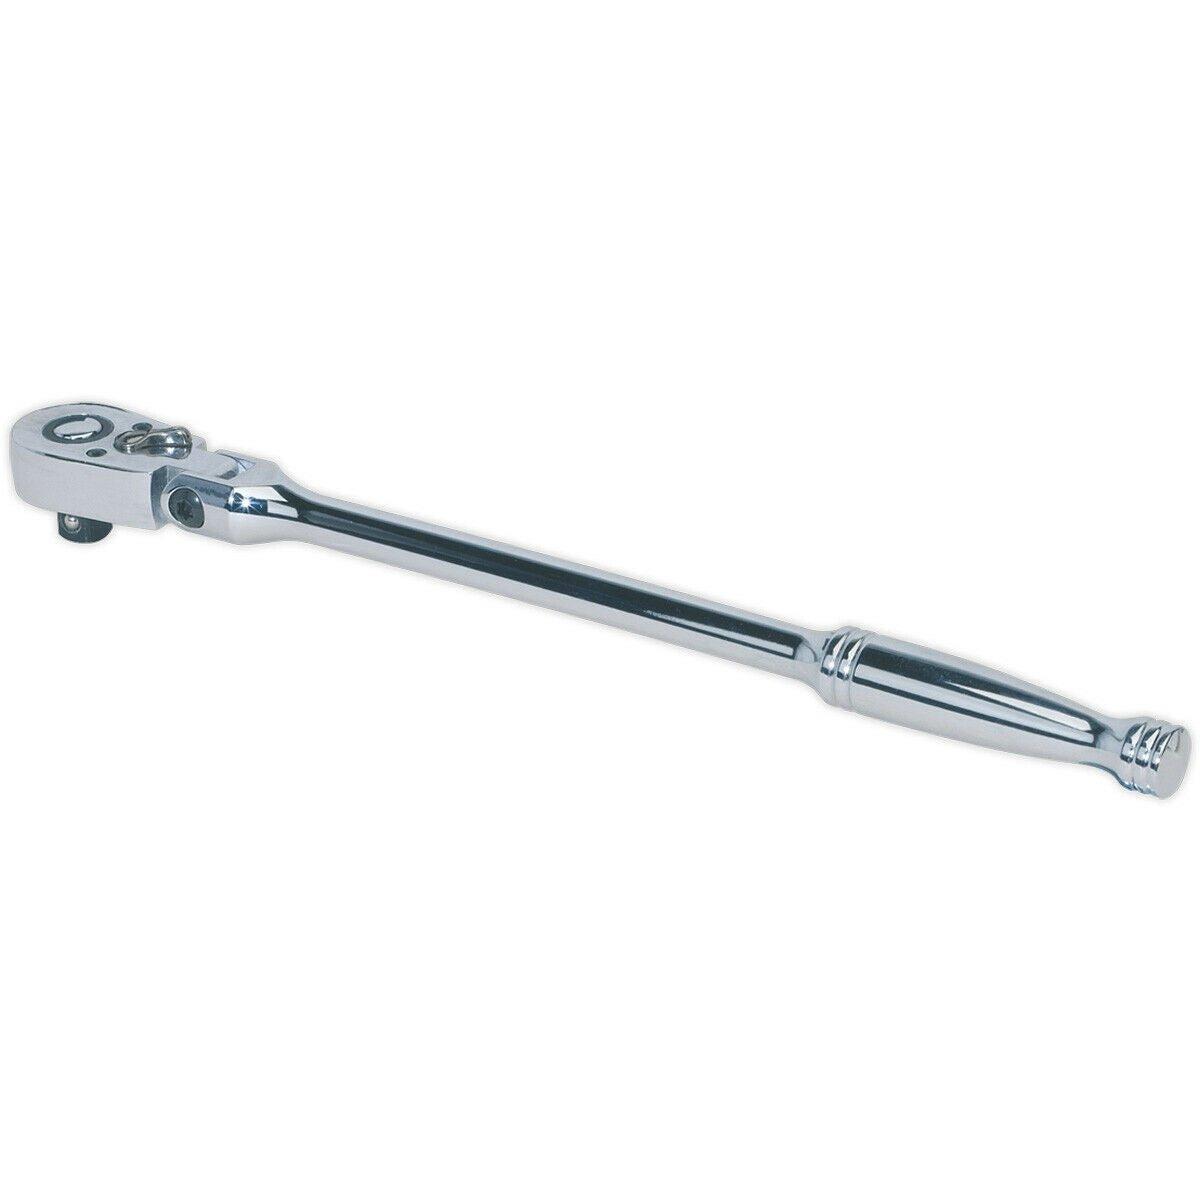 Long Reach 48-Tooth Flexi-Head Ratchet Wrench - 3/8 Inch Sq Drive - Flip Reverse